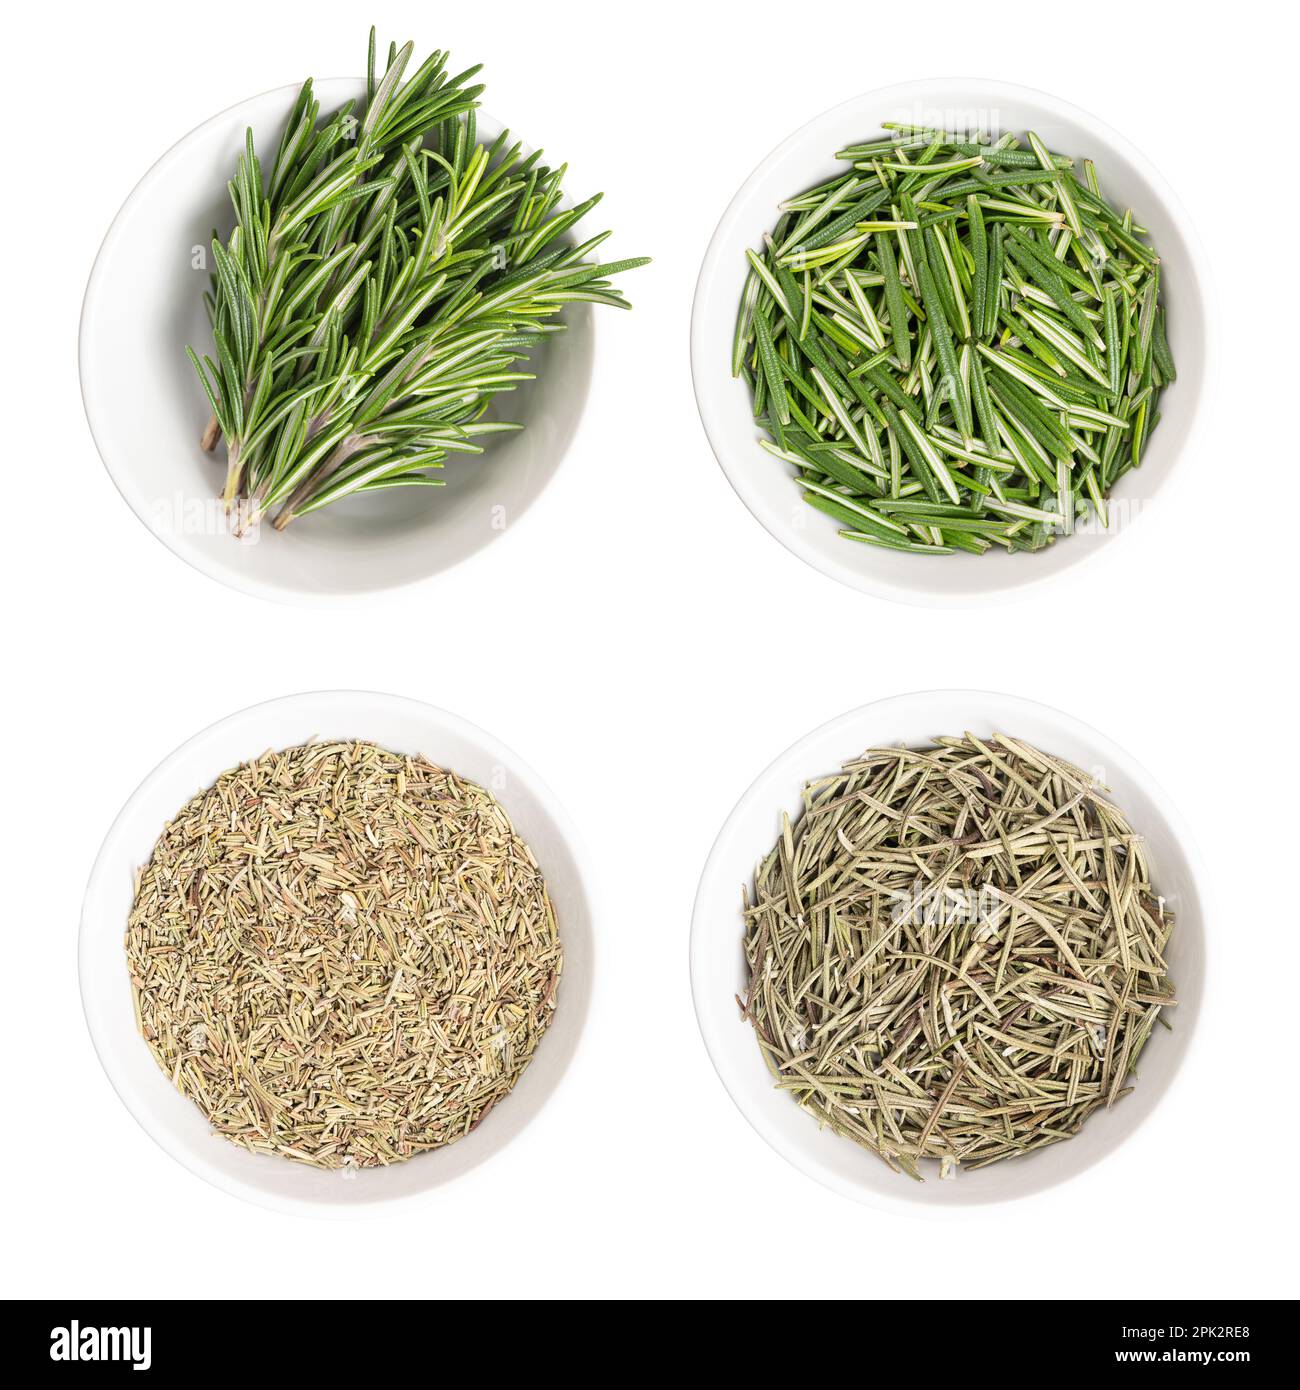 Fresh and dried rosemary in white bowls. Green twigs and needles of Salvia rosmarinus and dried chopped branches and the leaves. Stock Photo